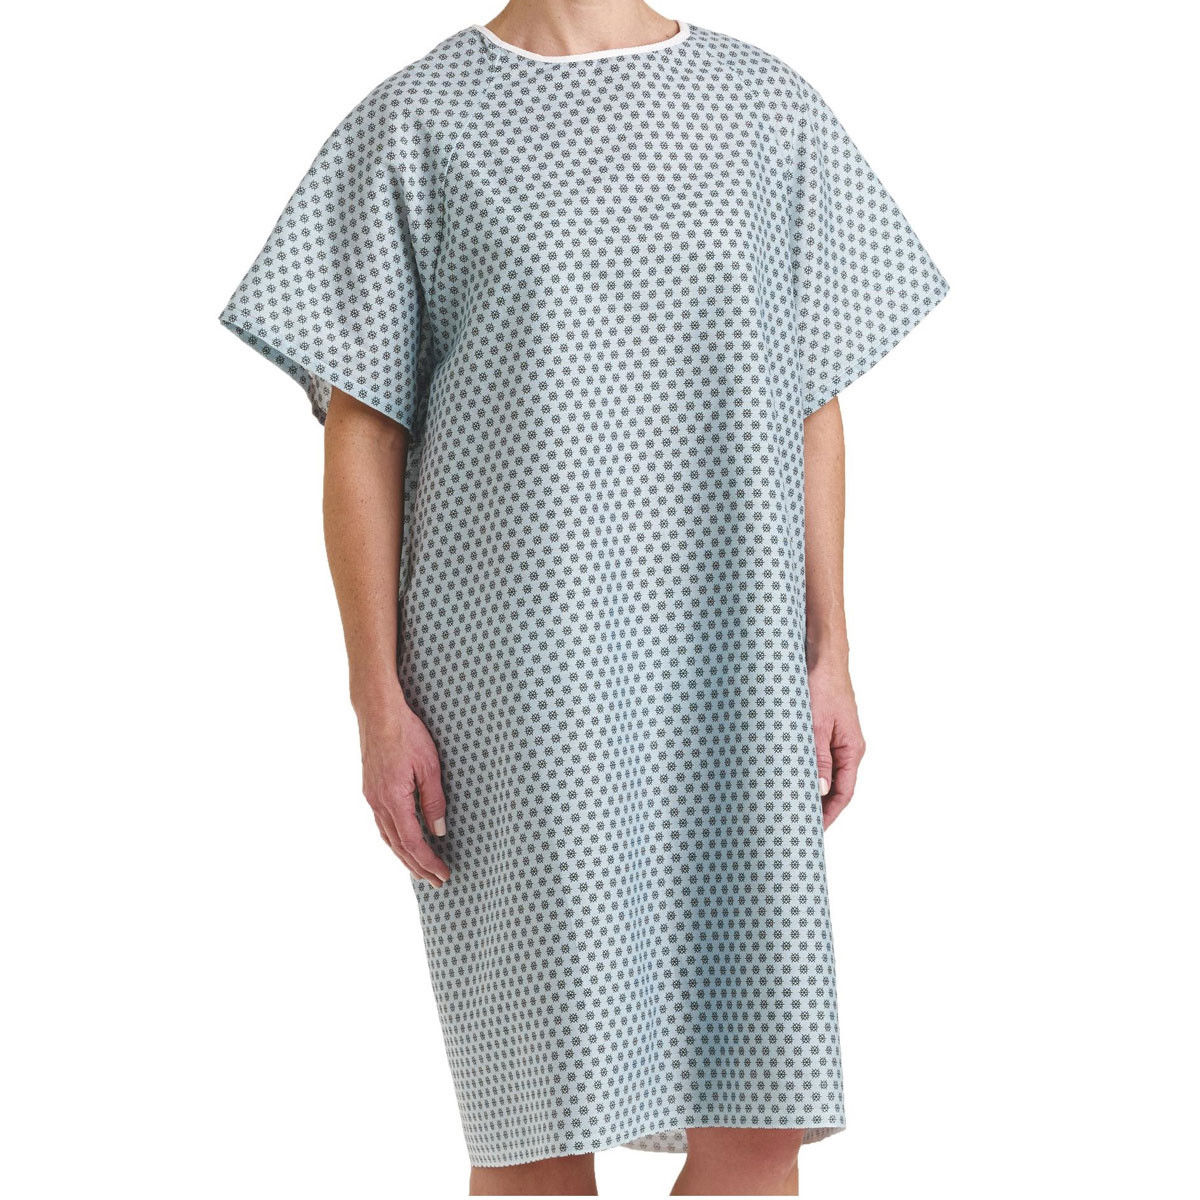 From where are these hospital gowns shipped?